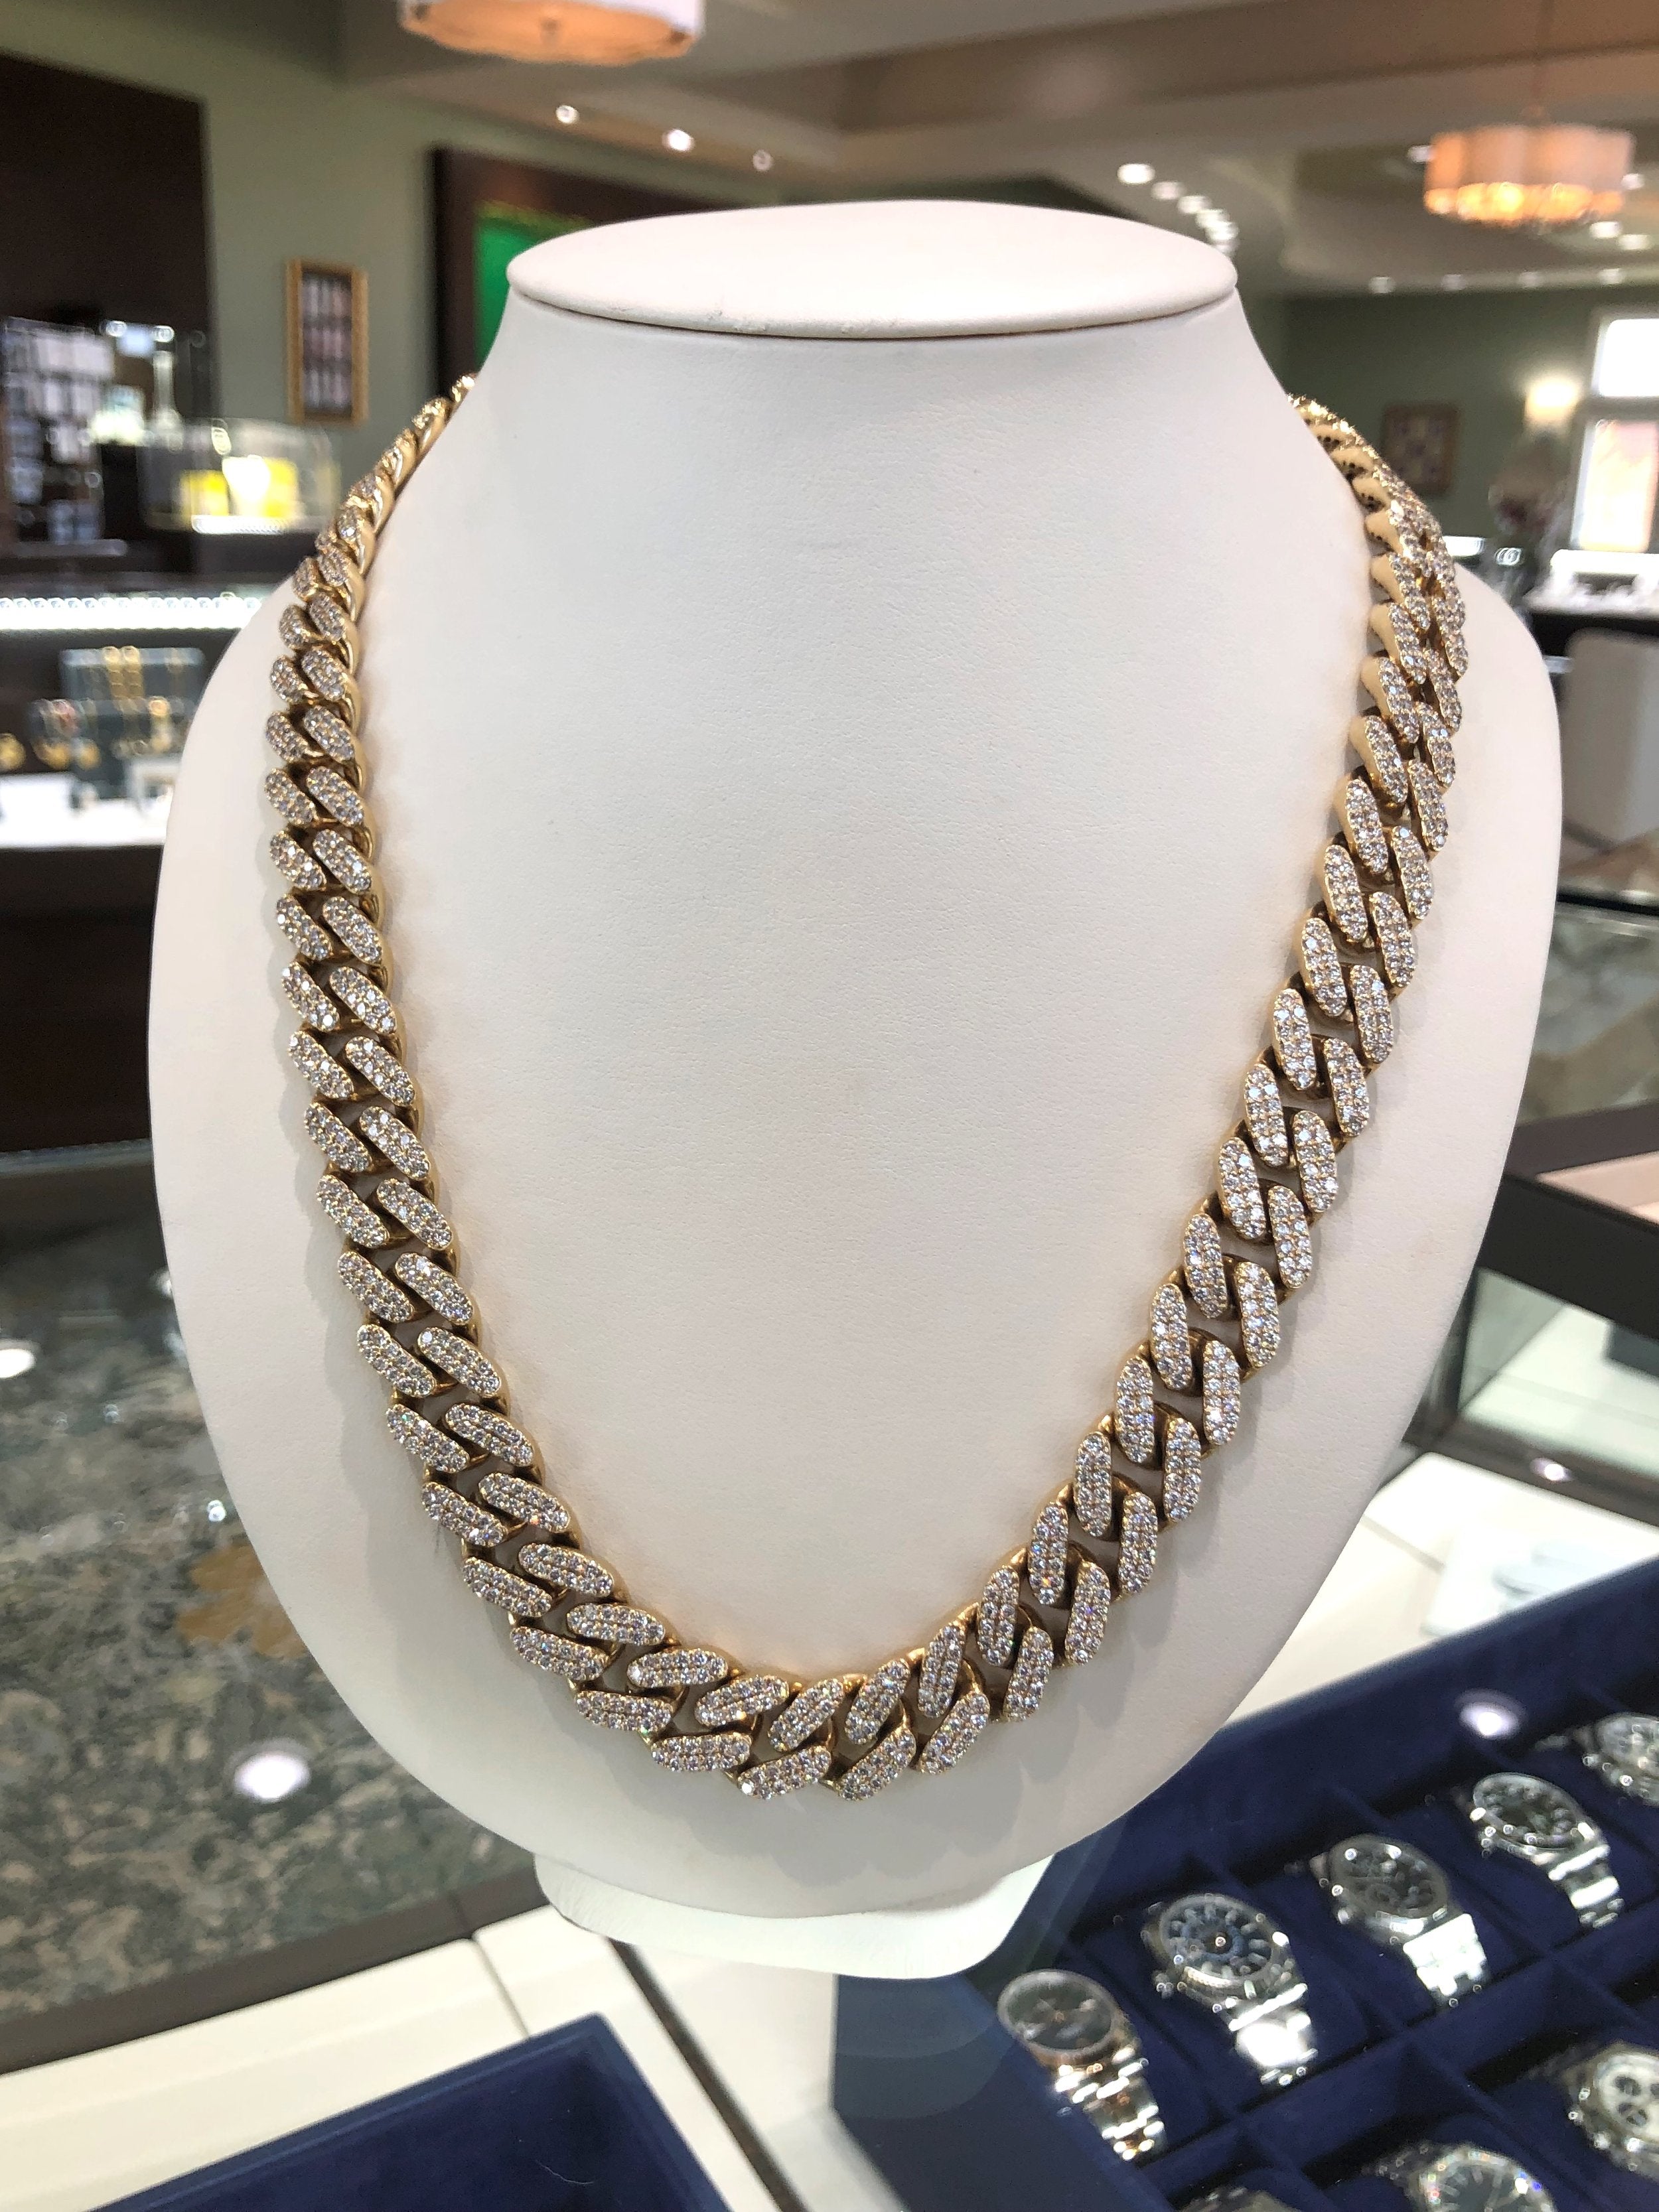 14k Miami Cuban Link Necklace VVS1 44 CT's.t.w. Rose/White ” Iced Diam